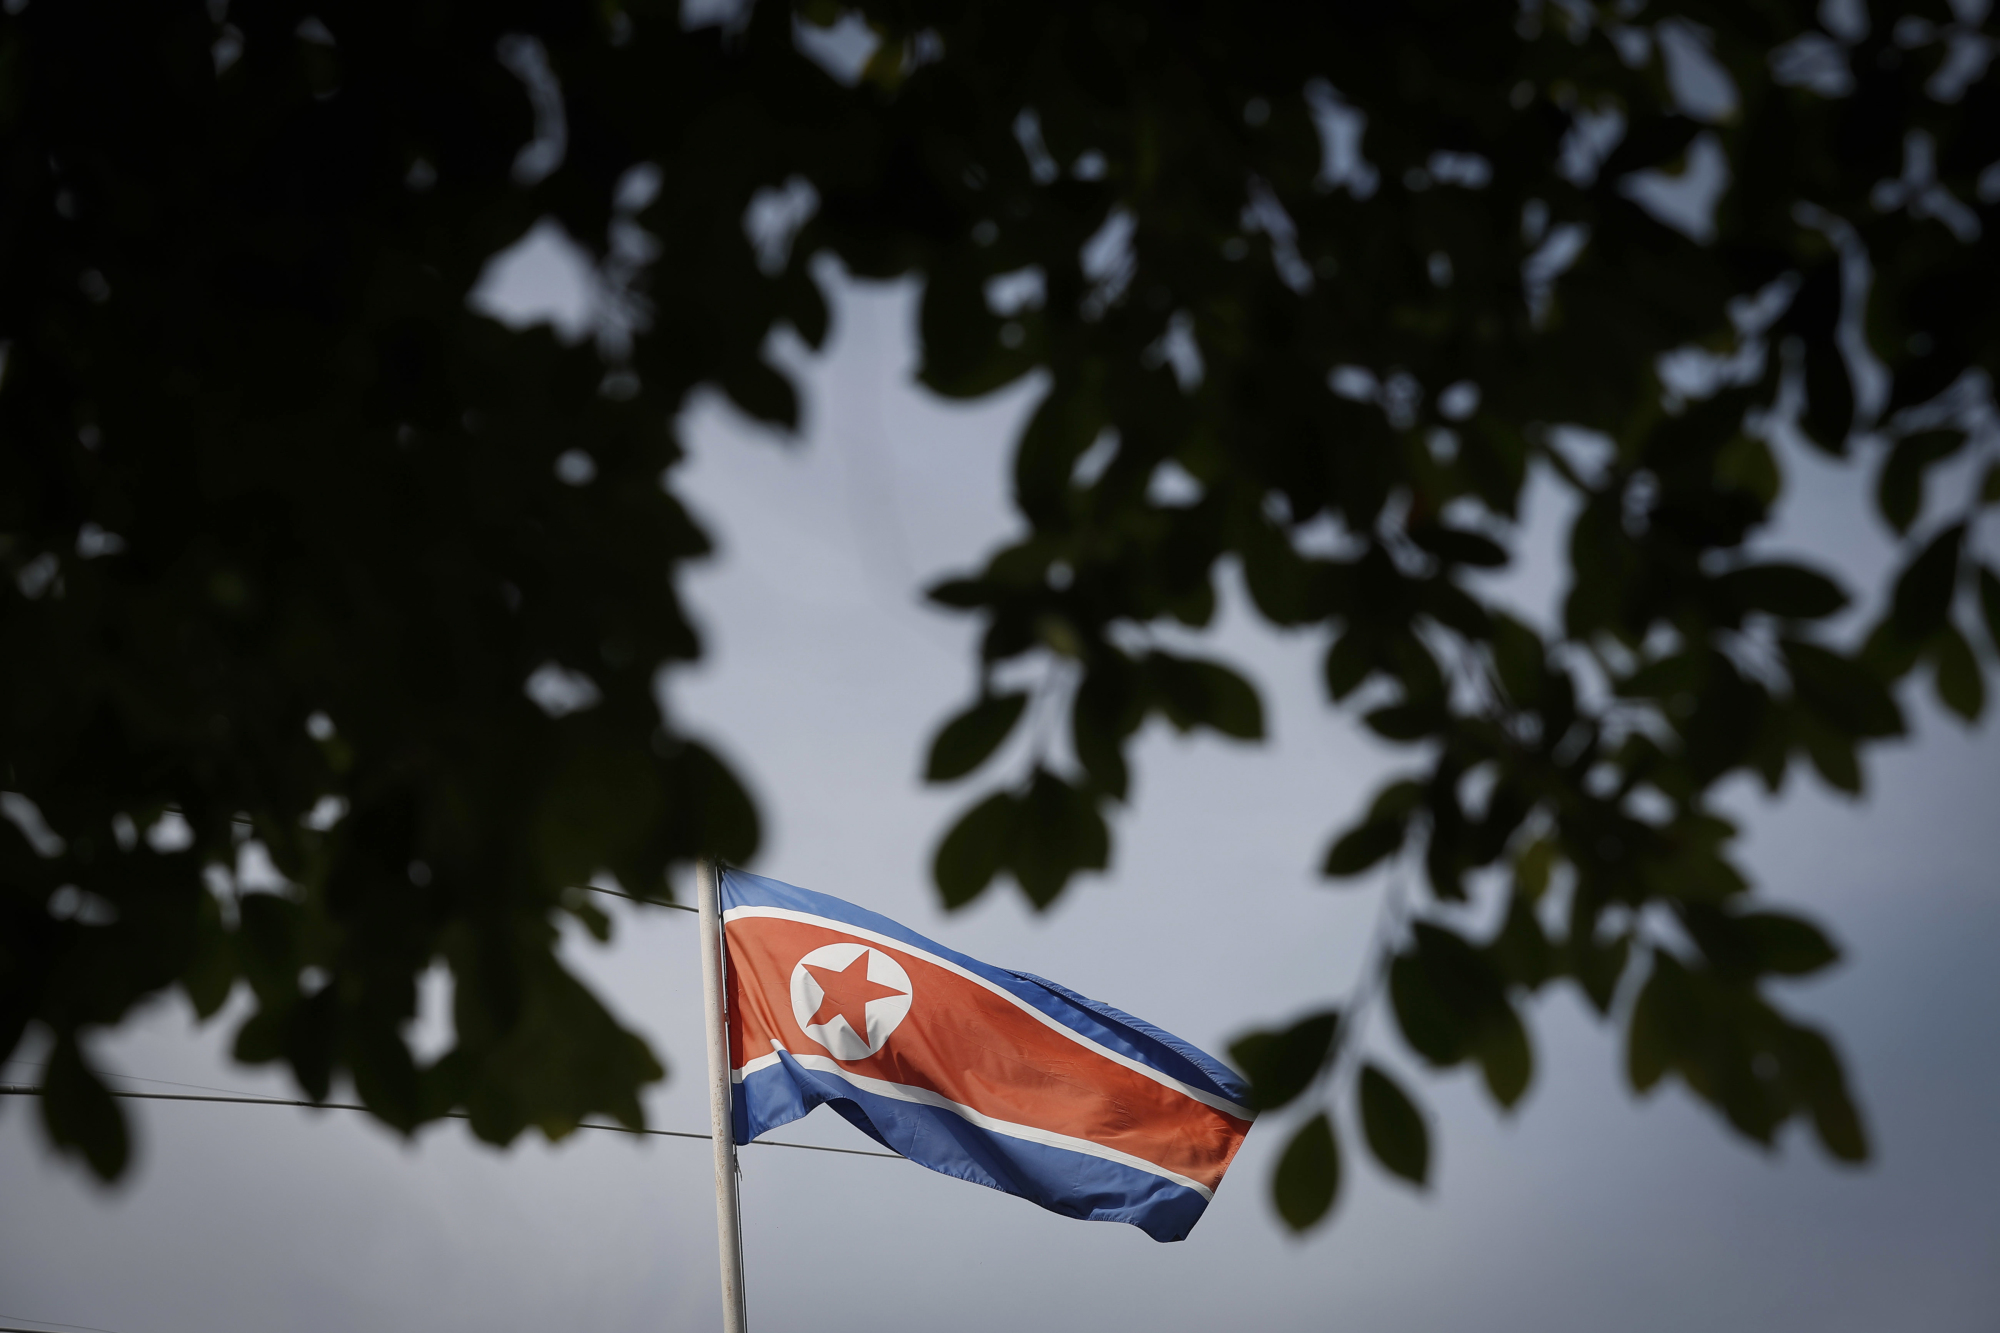 North Korea's flag flutters at the North Korean Embassy in Kuala Lumpur, Malaysia, in March 2017. | AP